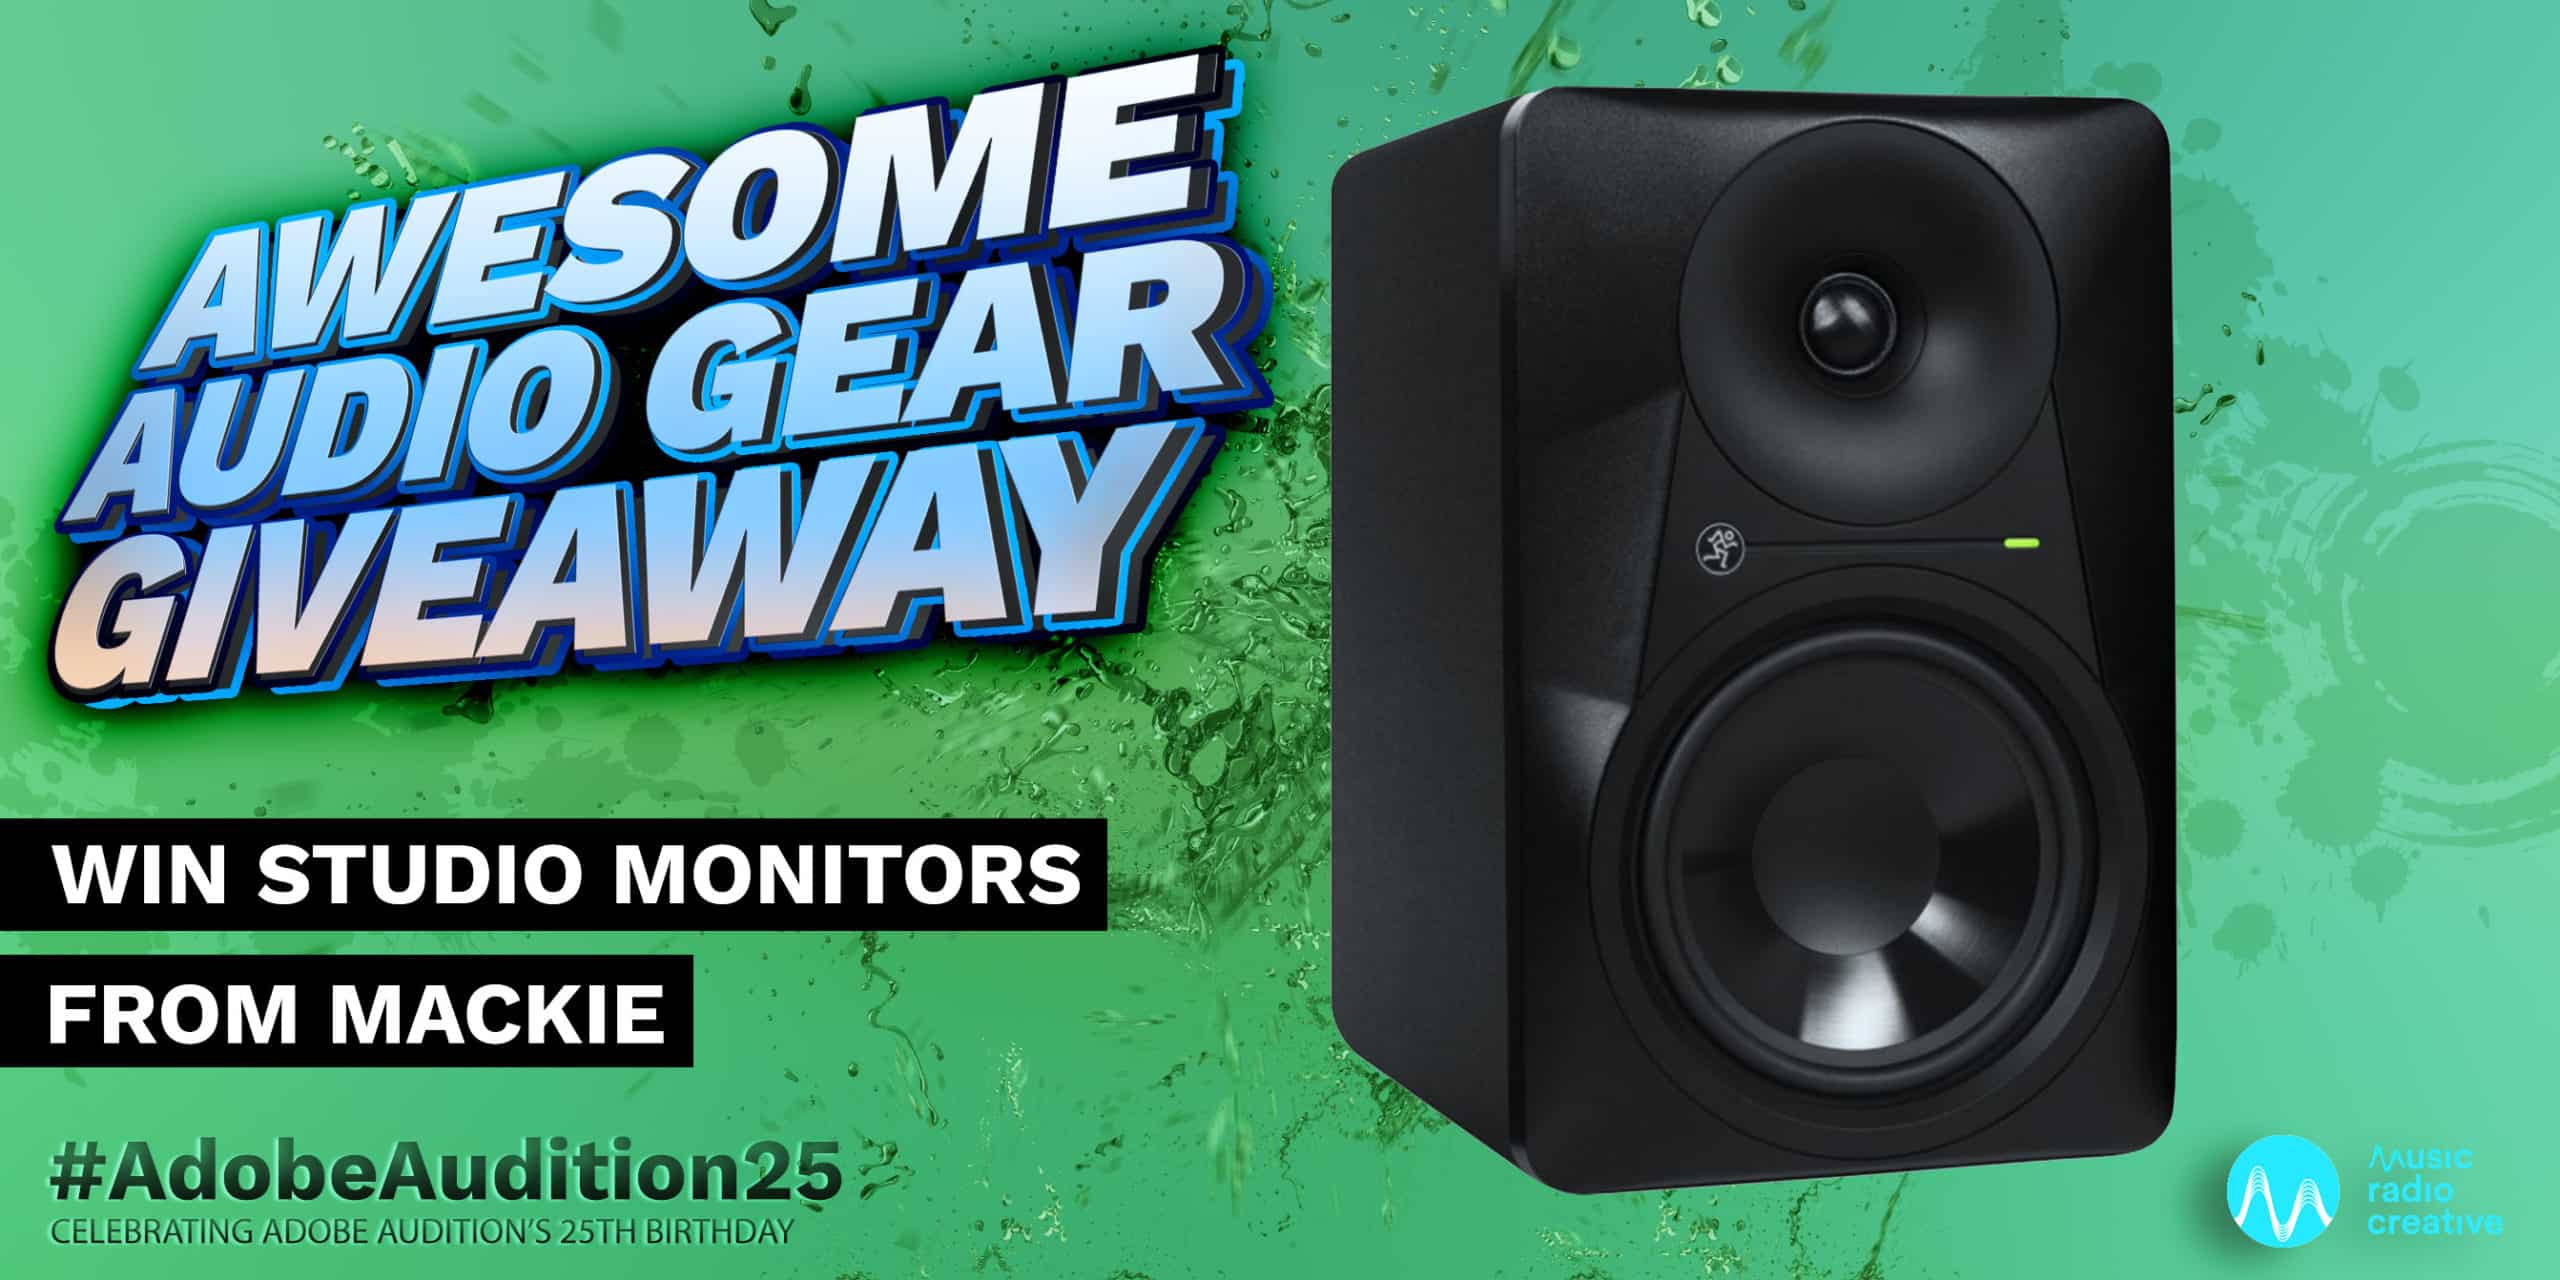 Win Studio Monitors from Mackie Awesome Audio Gear Giveaway  Music Radio Creative